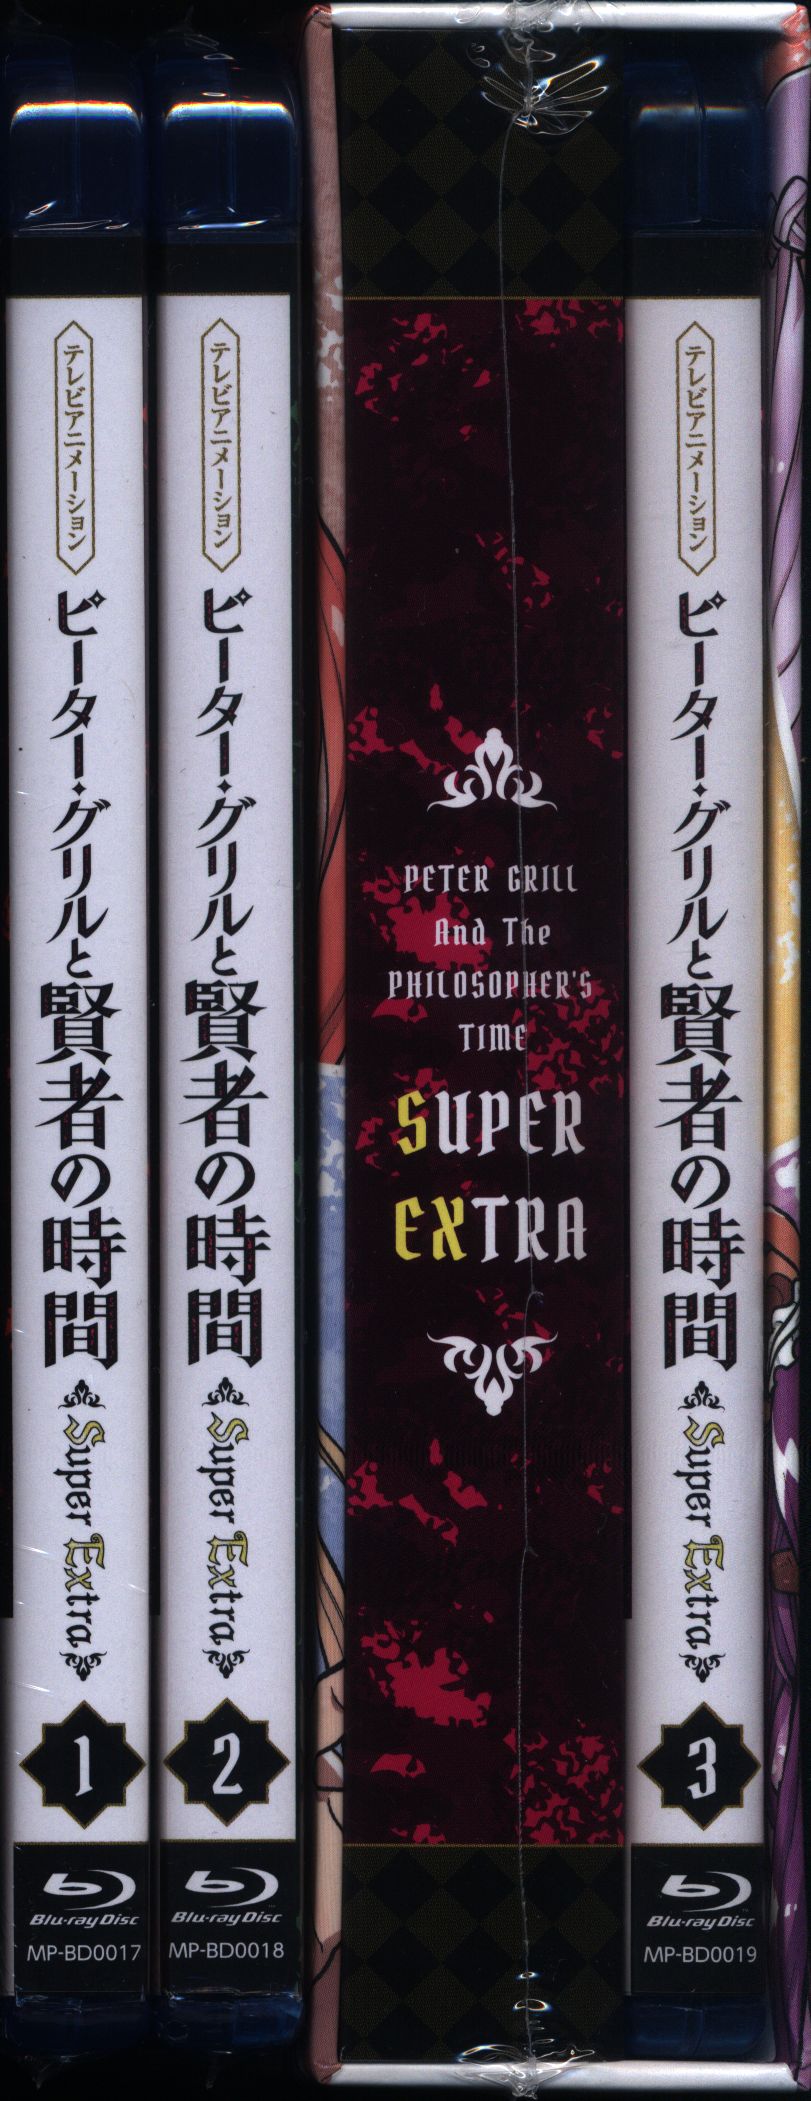 Peter Grill and the Philosopher's Time Super Extra Japanese Volume